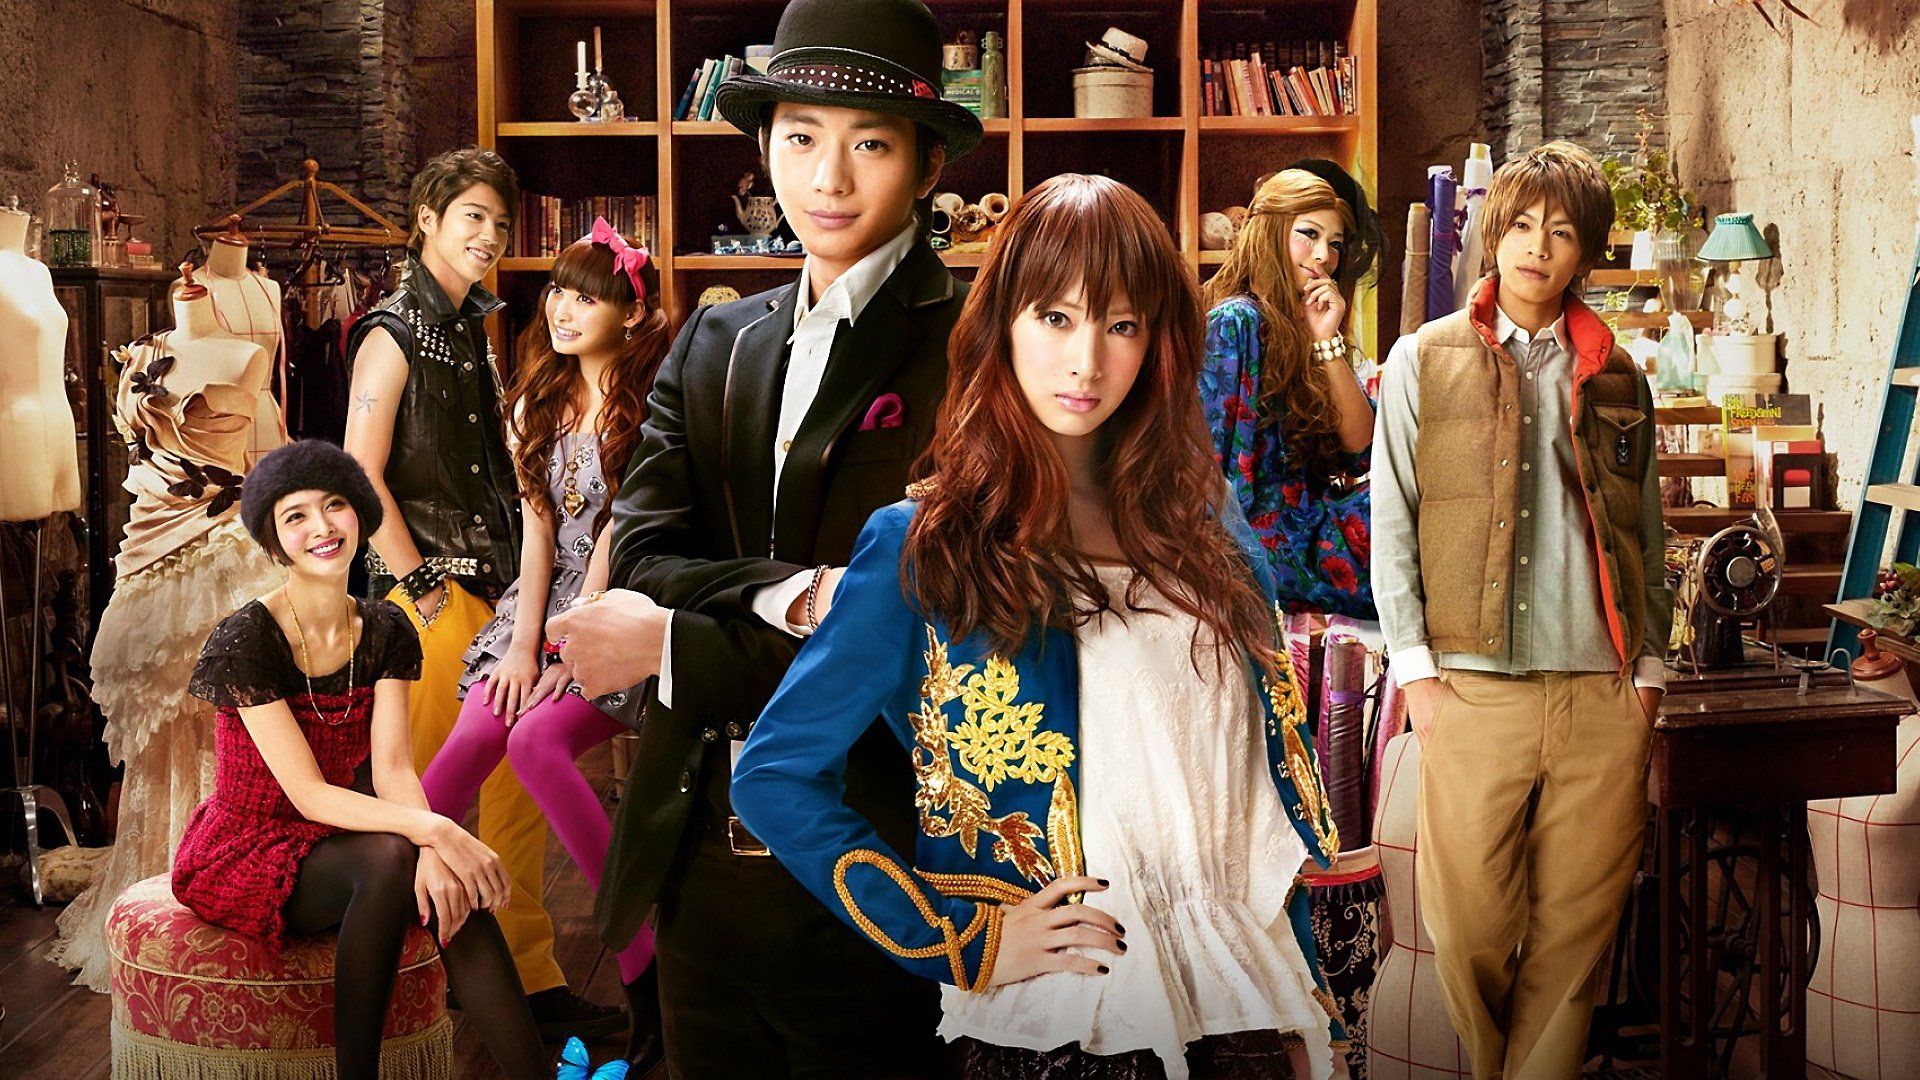 The cast of Paradise Kiss in a promo image